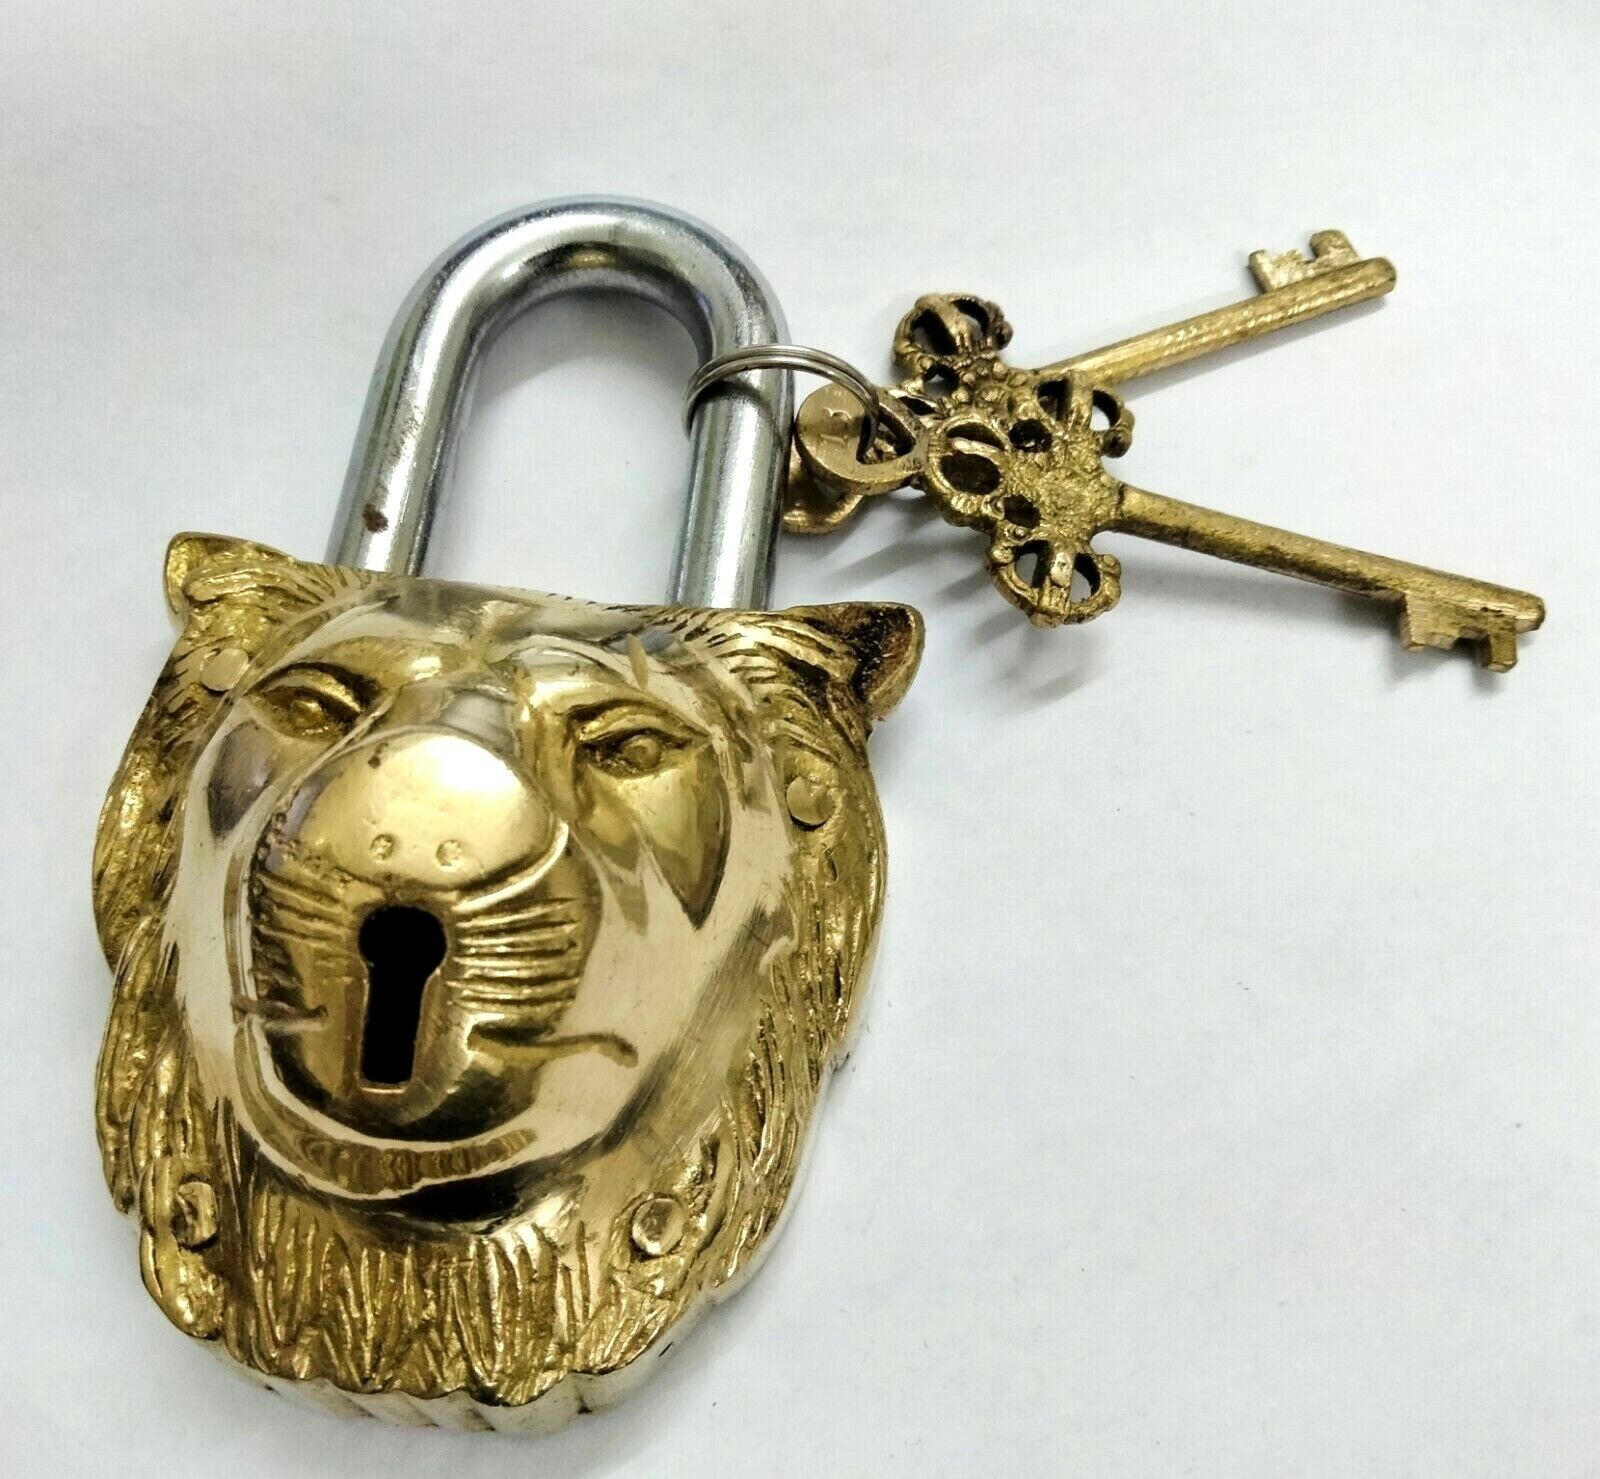 Brass Made Vintage Padlock Lion Face Lock with Working Key Rare Old Style